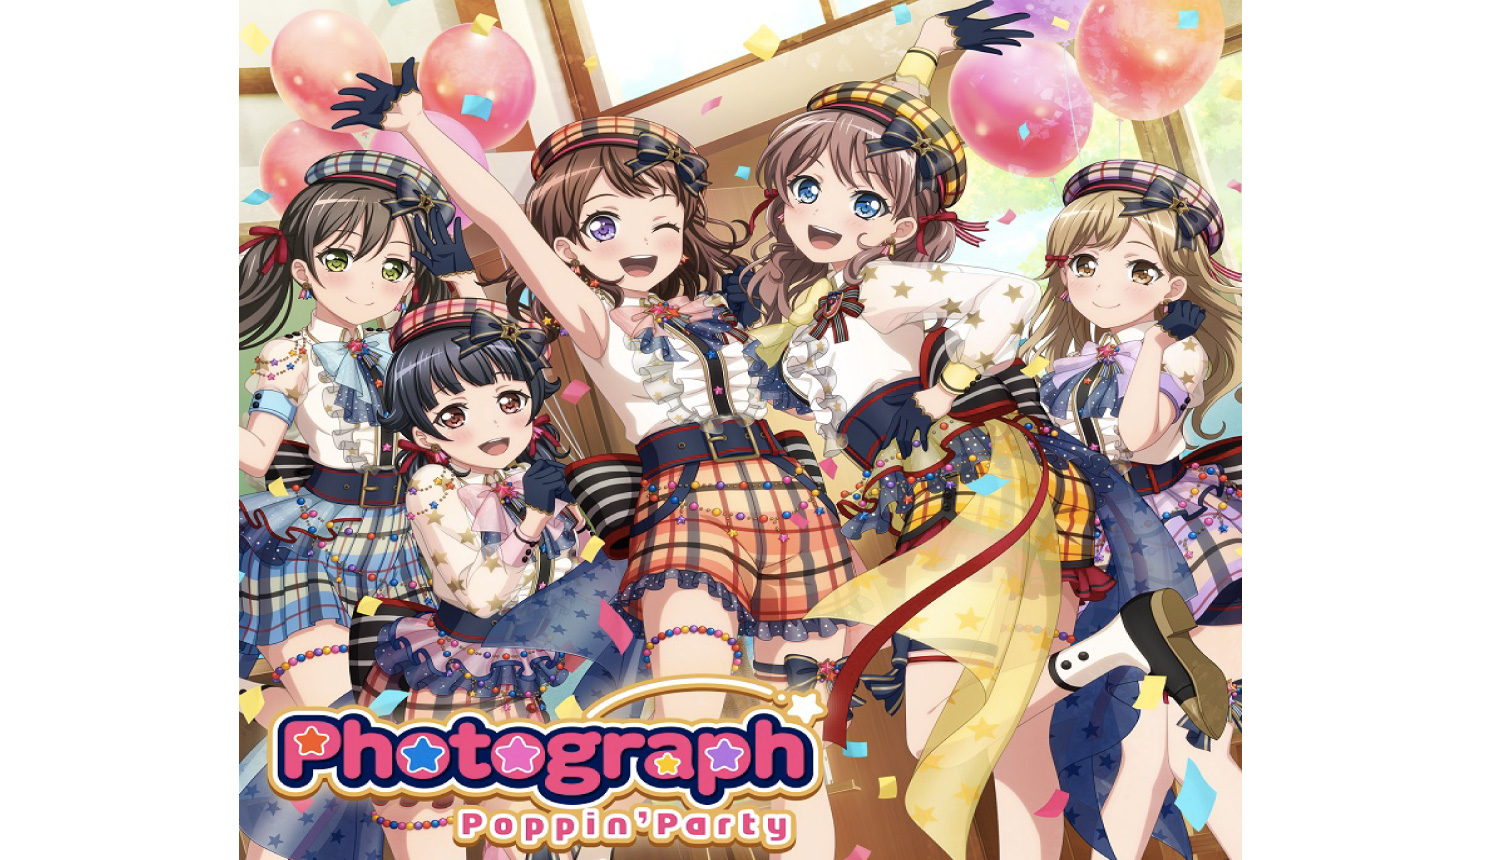 BanG Dream! Anime Band Poppin'Party's New Single Tops Oricon